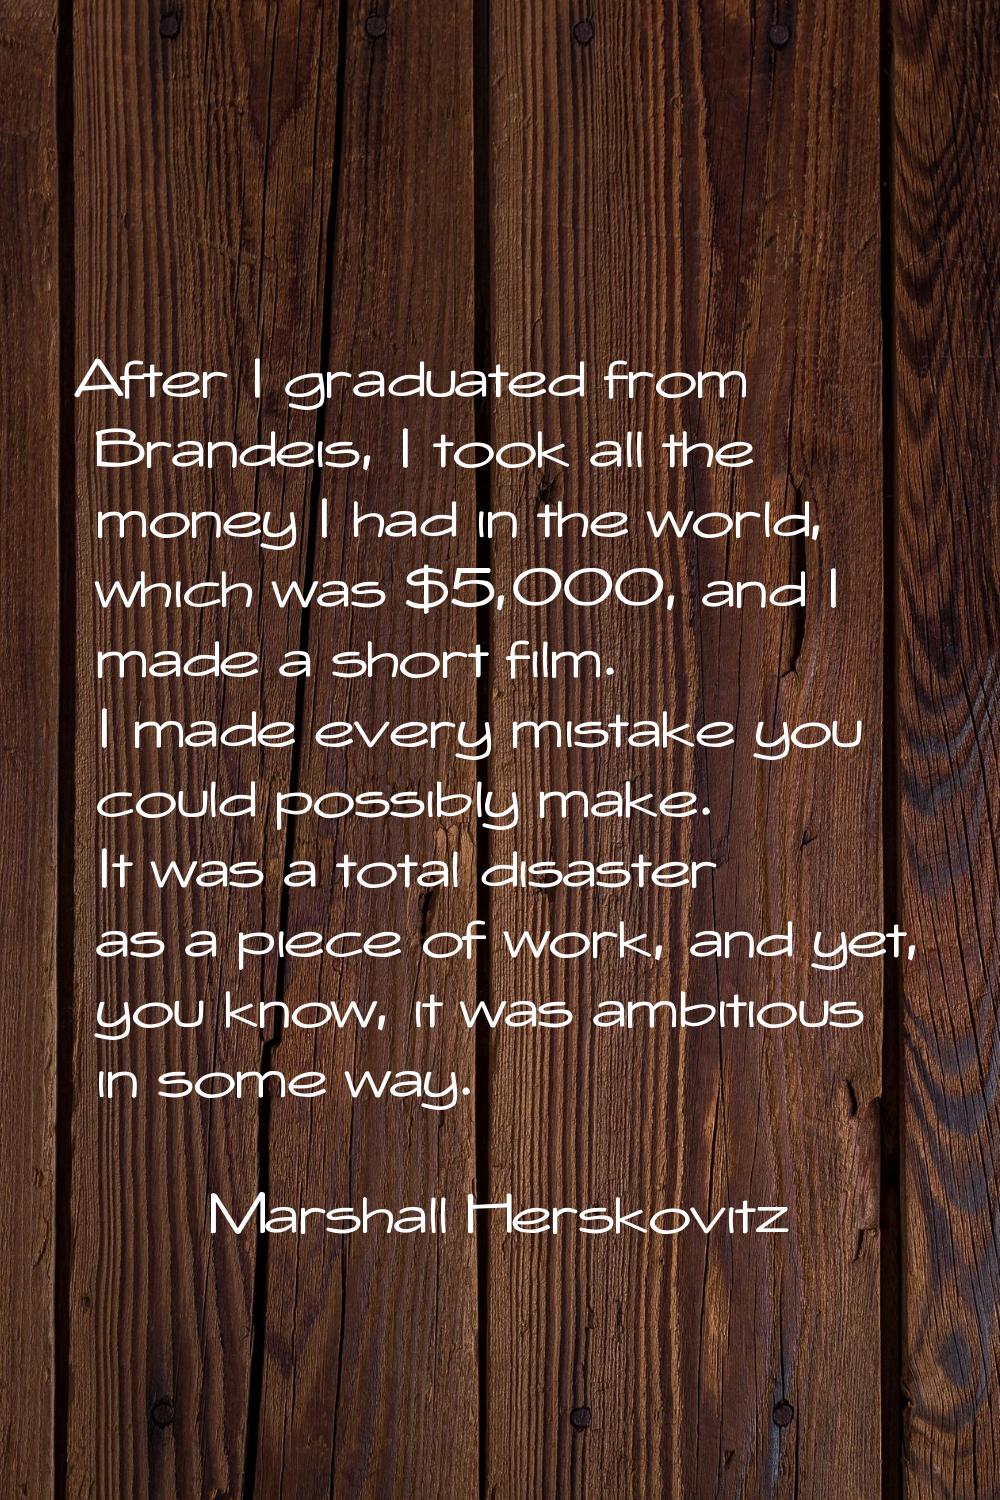 After I graduated from Brandeis, I took all the money I had in the world, which was $5,000, and I m